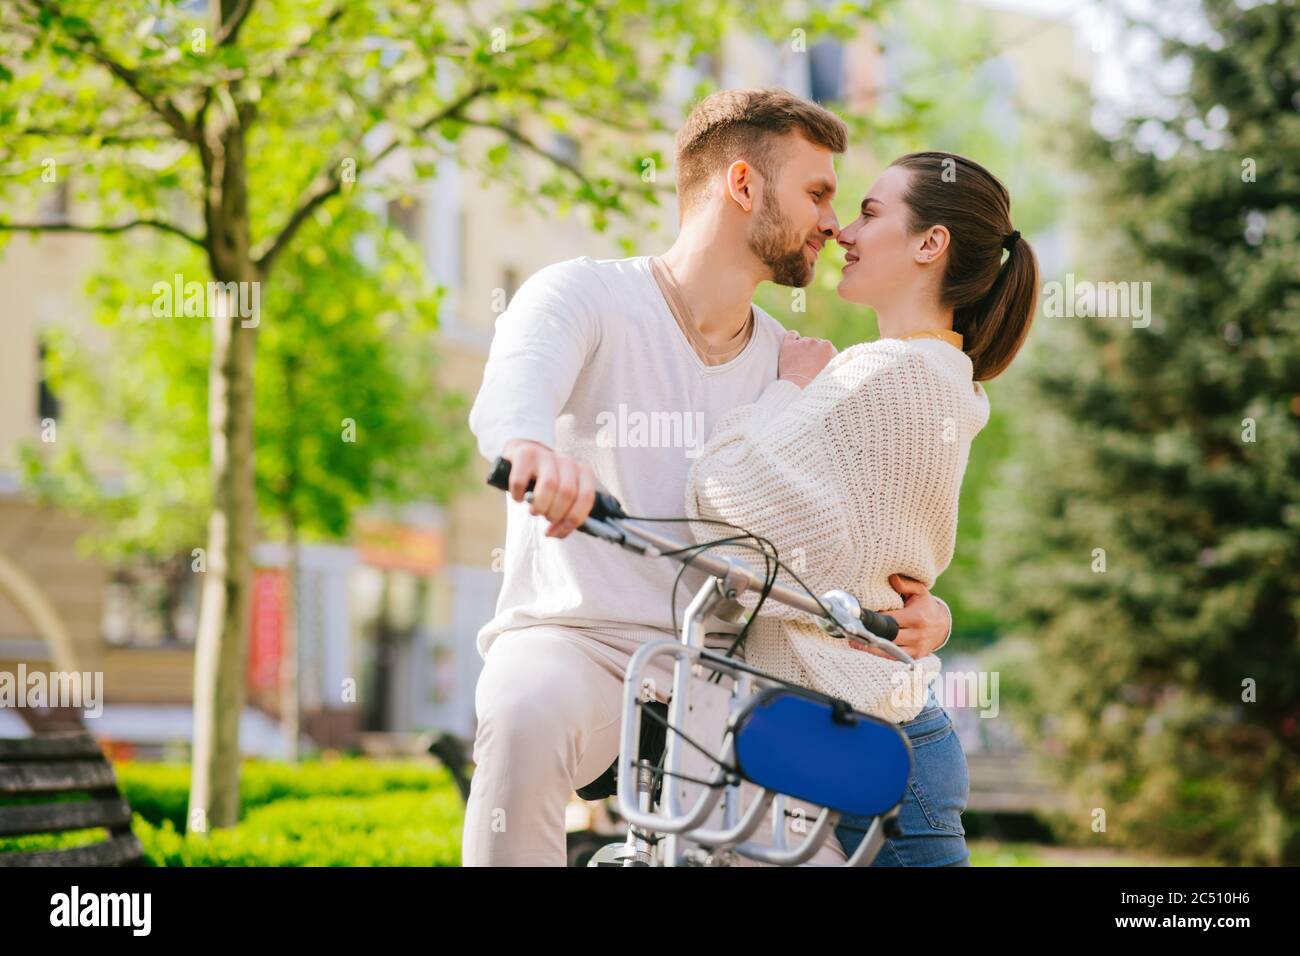 Man and woman hugging face to face in the park Stock Photo